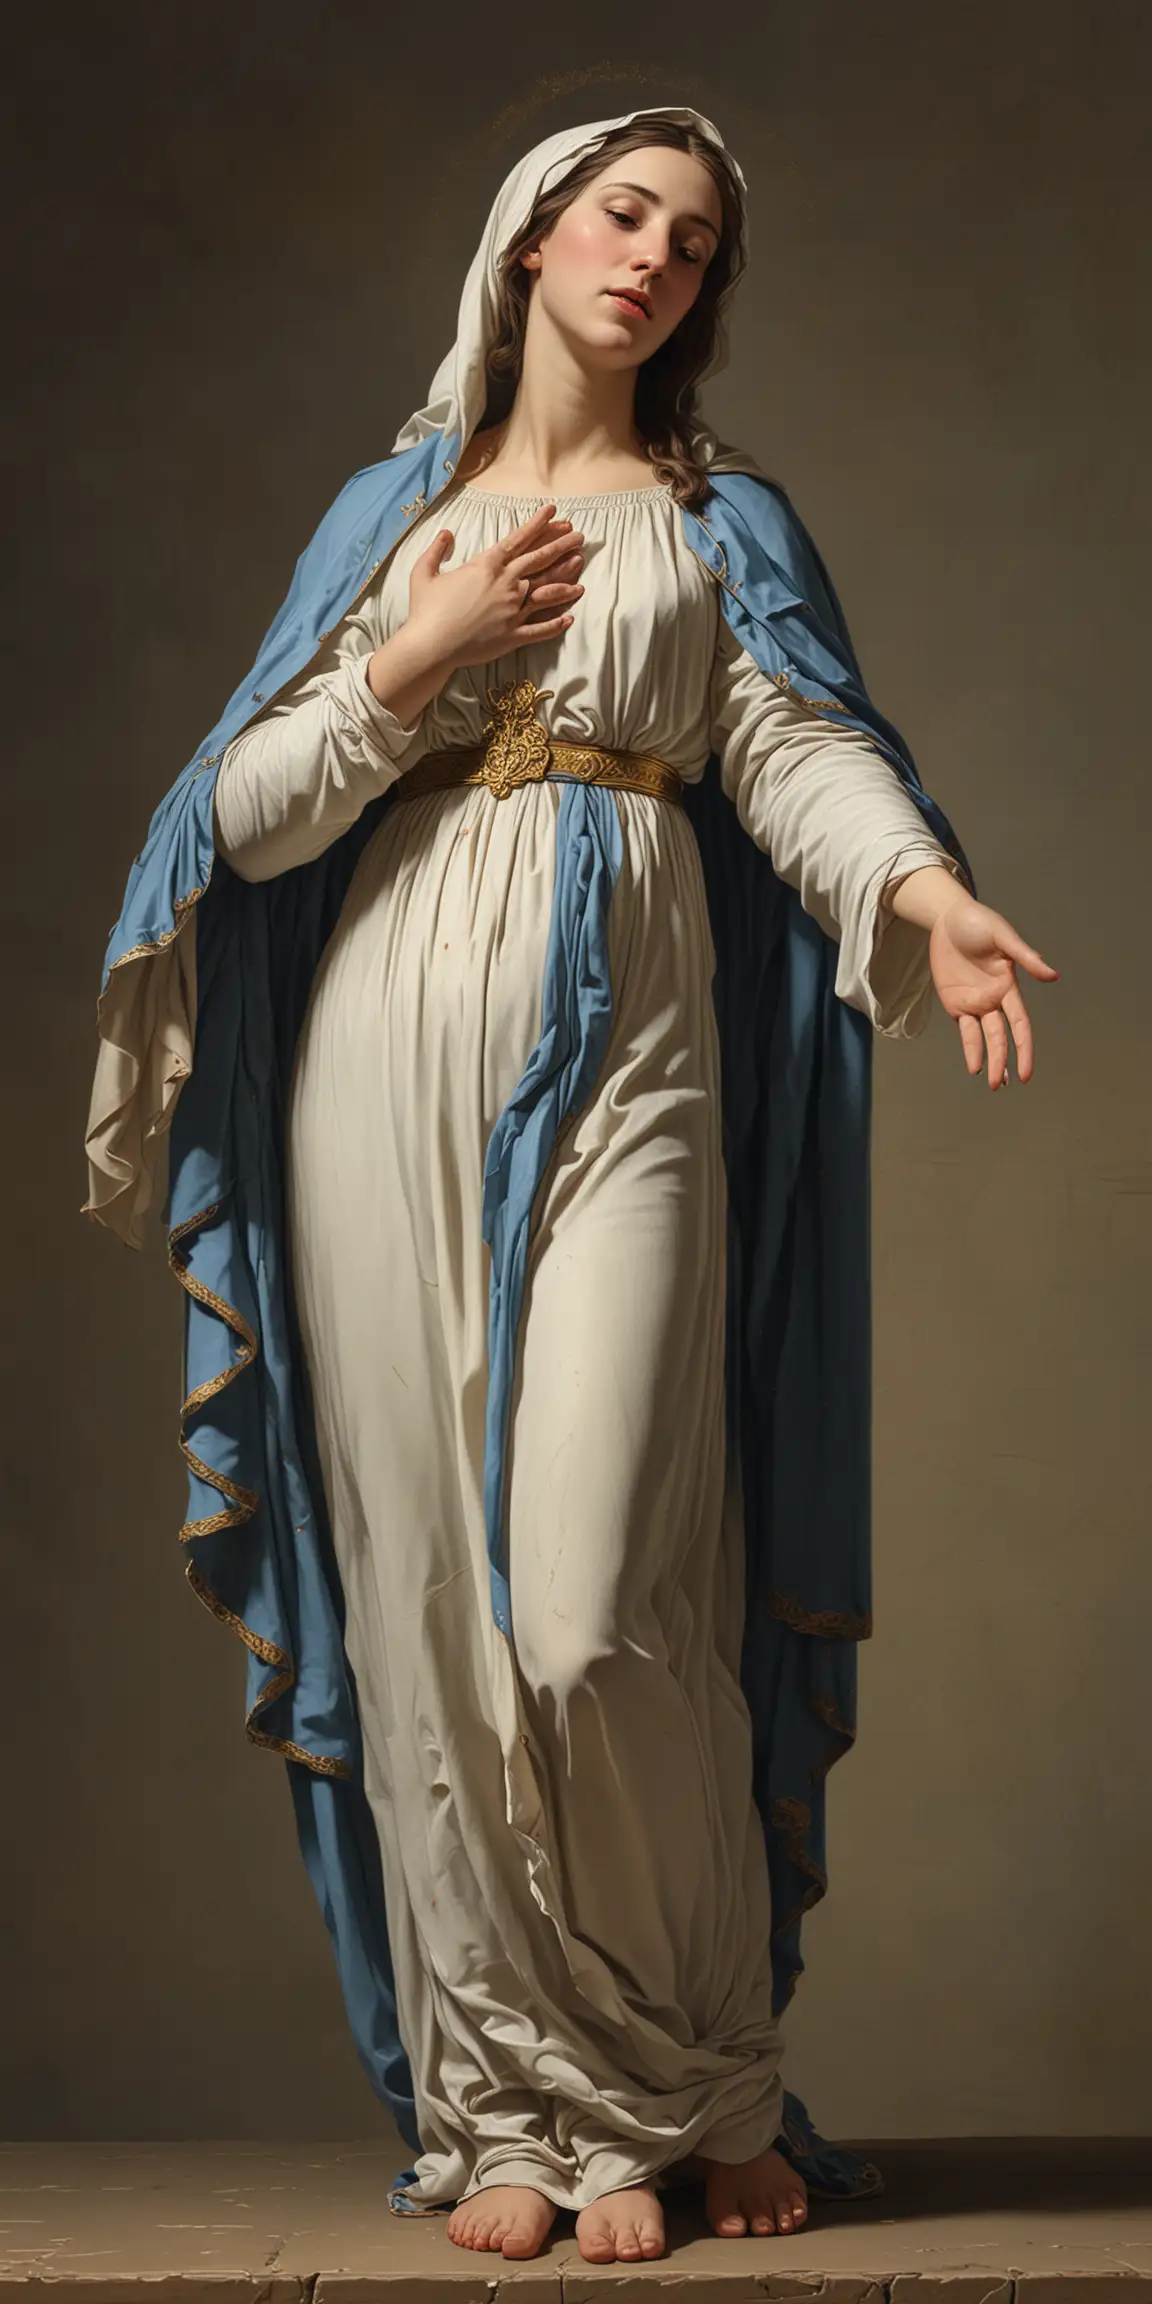 Classic Depiction of Virgin Mary in JacquesLouis David Style